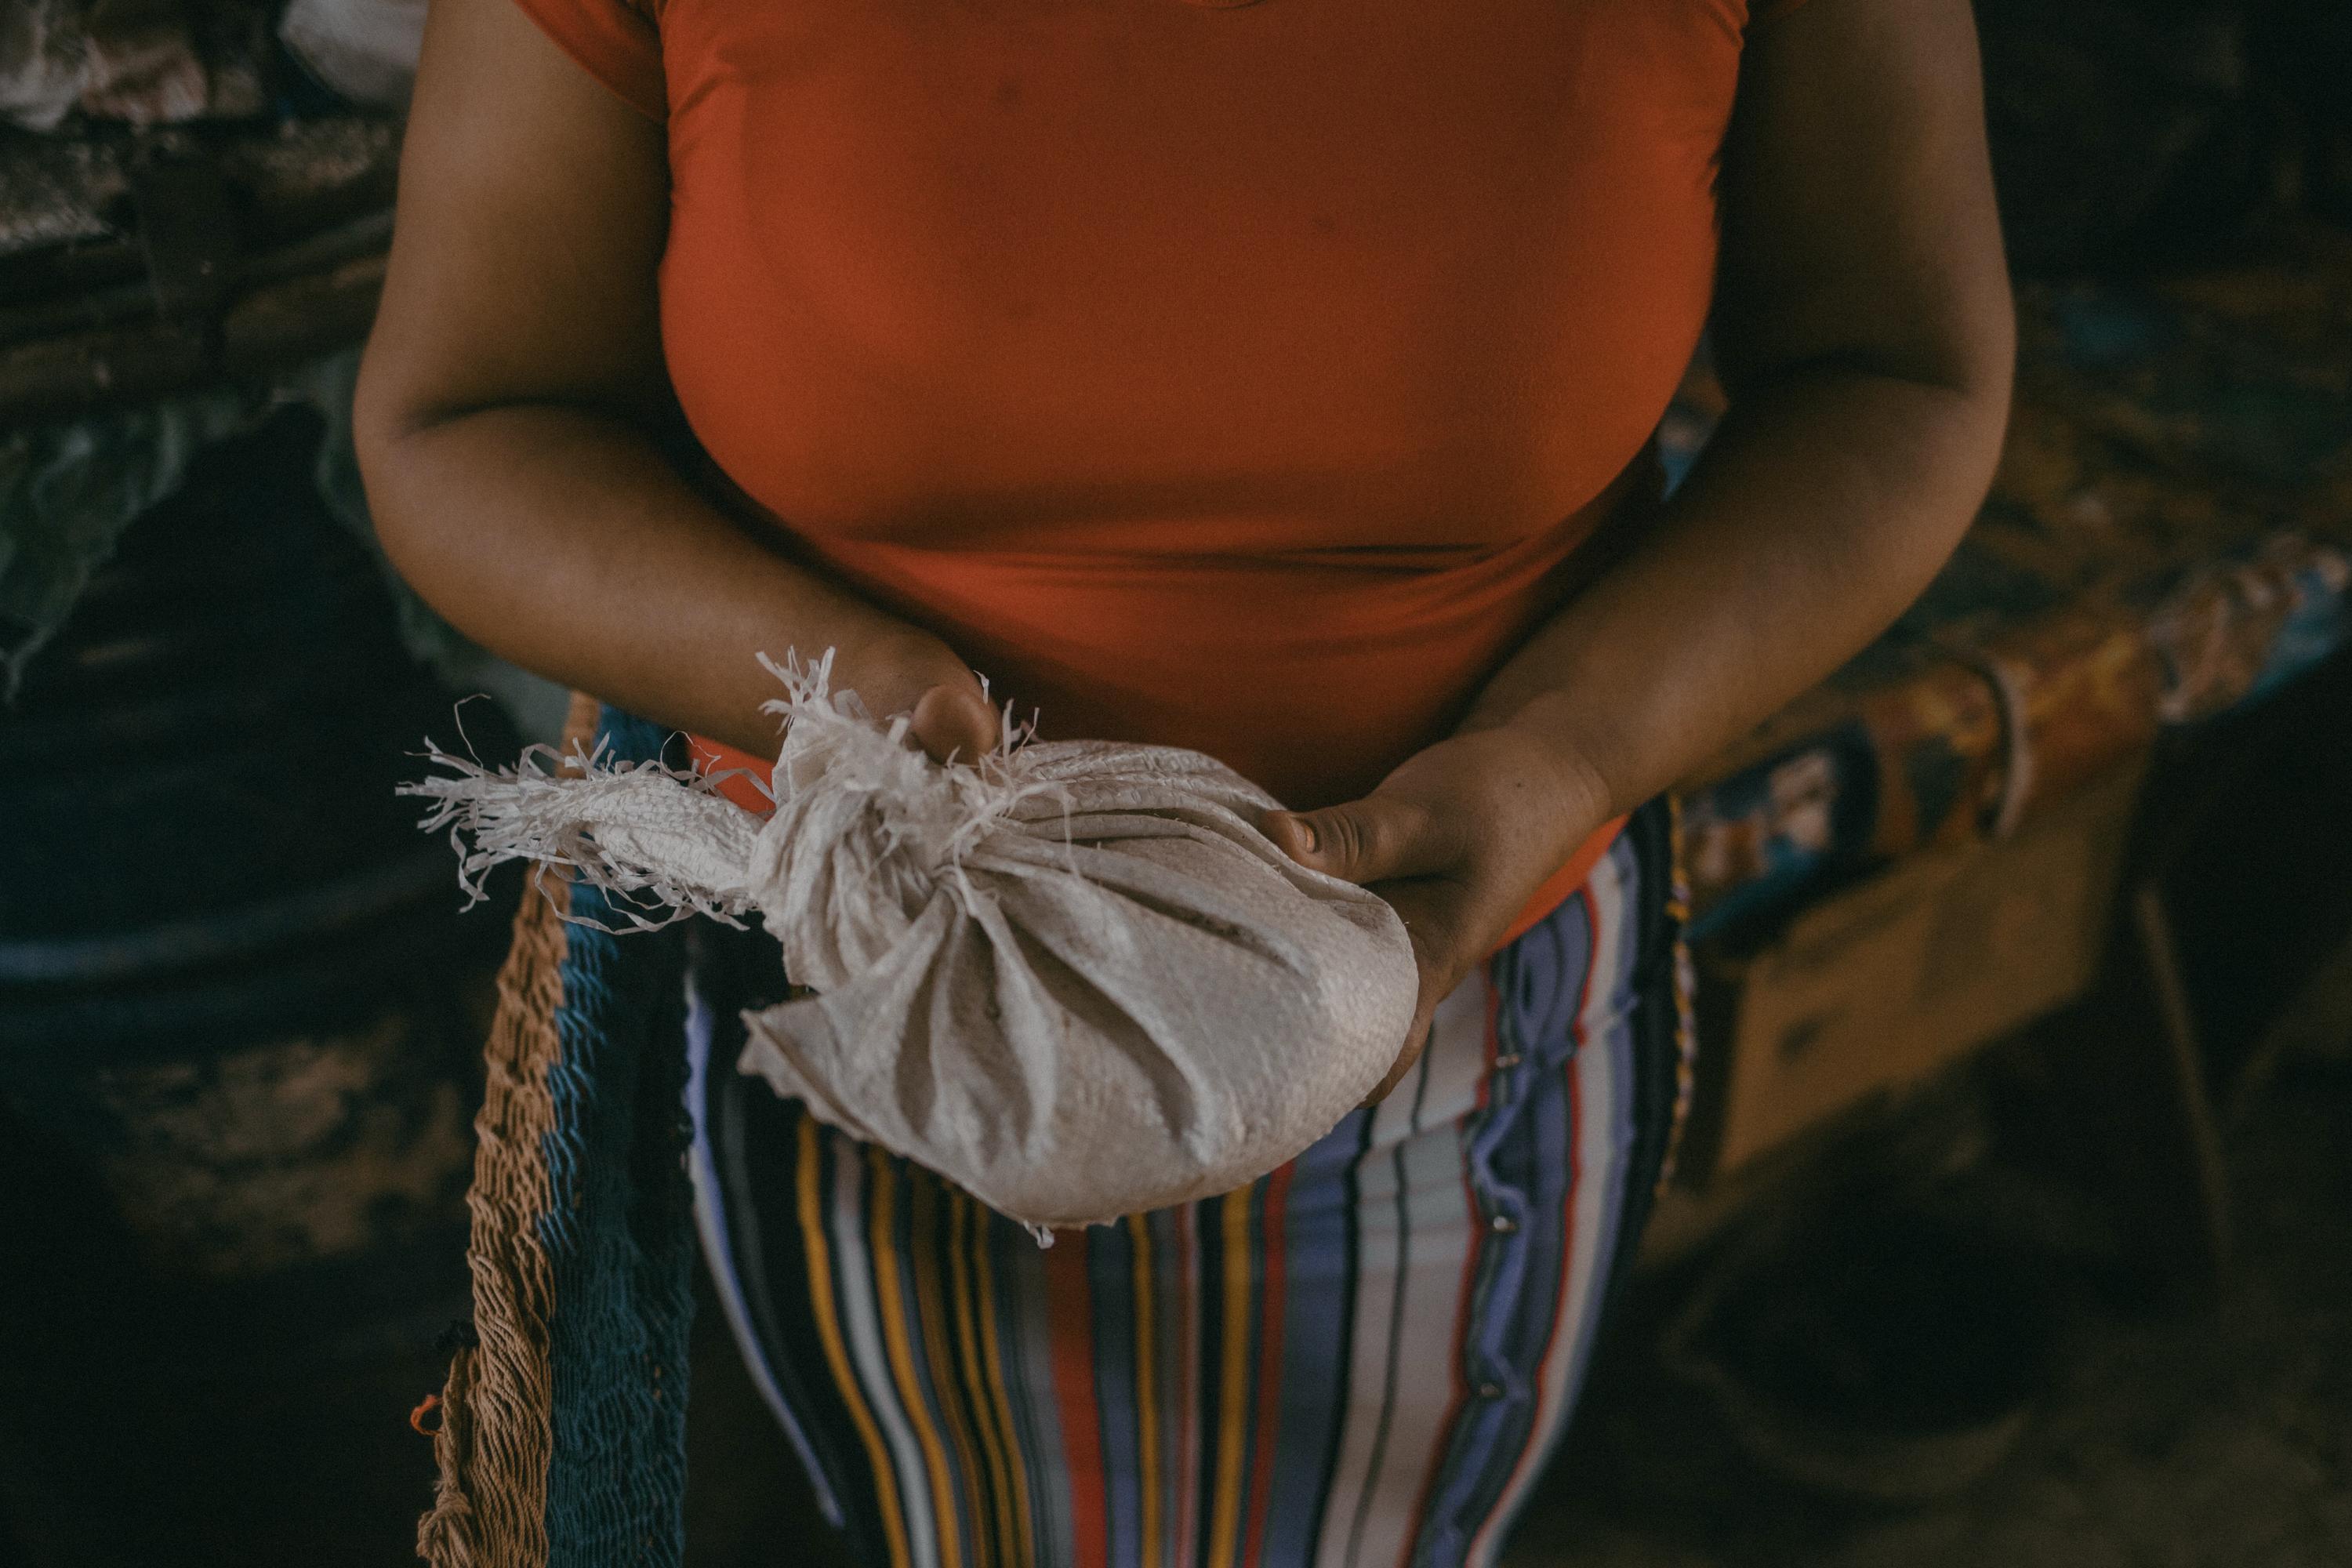 Ana holds the small amount of rice that remains from a donation her family received a few months ago. Apart from the rice, her pantry contains some cooking oil and a milk carton filled with sugar. Photo Carlos Barrera